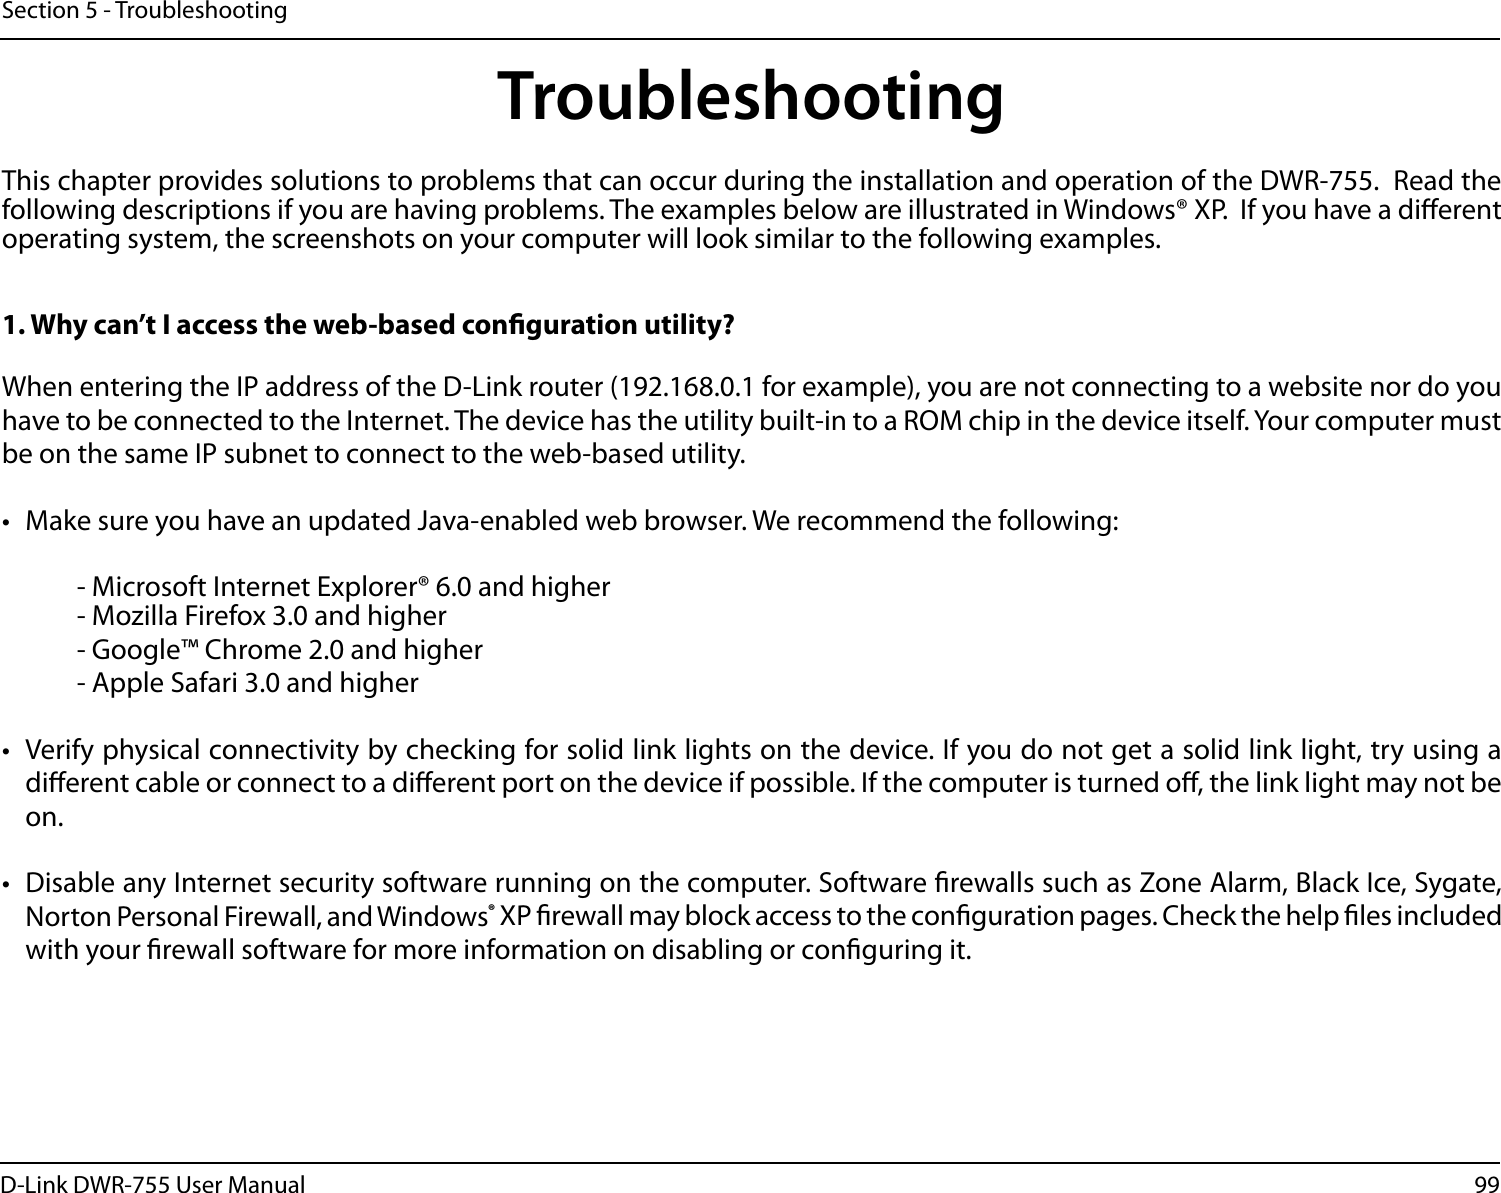 99D-Link DWR-755 User ManualSection 5 - TroubleshootingTroubleshootingThis chapter provides solutions to problems that can occur during the installation and operation of the DWR-755.  Read the following descriptions if you are having problems. The examples below are illustrated in Windows® XP.  If you have a dierent operating system, the screenshots on your computer will look similar to the following examples.1. Why can’t I access the web-based conguration utility?When entering the IP address of the D-Link router (192.168.0.1 for example), you are not connecting to a website nor do you have to be connected to the Internet. The device has the utility built-in to a ROM chip in the device itself. Your computer must be on the same IP subnet to connect to the web-based utility. •  Make sure you have an updated Java-enabled web browser. We recommend the following:    - Microsoft Internet Explorer® 6.0 and higher  - Mozilla Firefox 3.0 and higher  - Google™ Chrome 2.0 and higher  - Apple Safari 3.0 and higher•  Verify physical connectivity by checking for solid link lights on the device. If you do not get a solid link light, try using a dierent cable or connect to a dierent port on the device if possible. If the computer is turned o, the link light may not be on.•  Disable any Internet security software running on the computer. Software rewalls such as Zone Alarm, Black Ice, Sygate, Norton Personal Firewall, and Windows® XP rewall may block access to the conguration pages. Check the help les included with your rewall software for more information on disabling or conguring it.